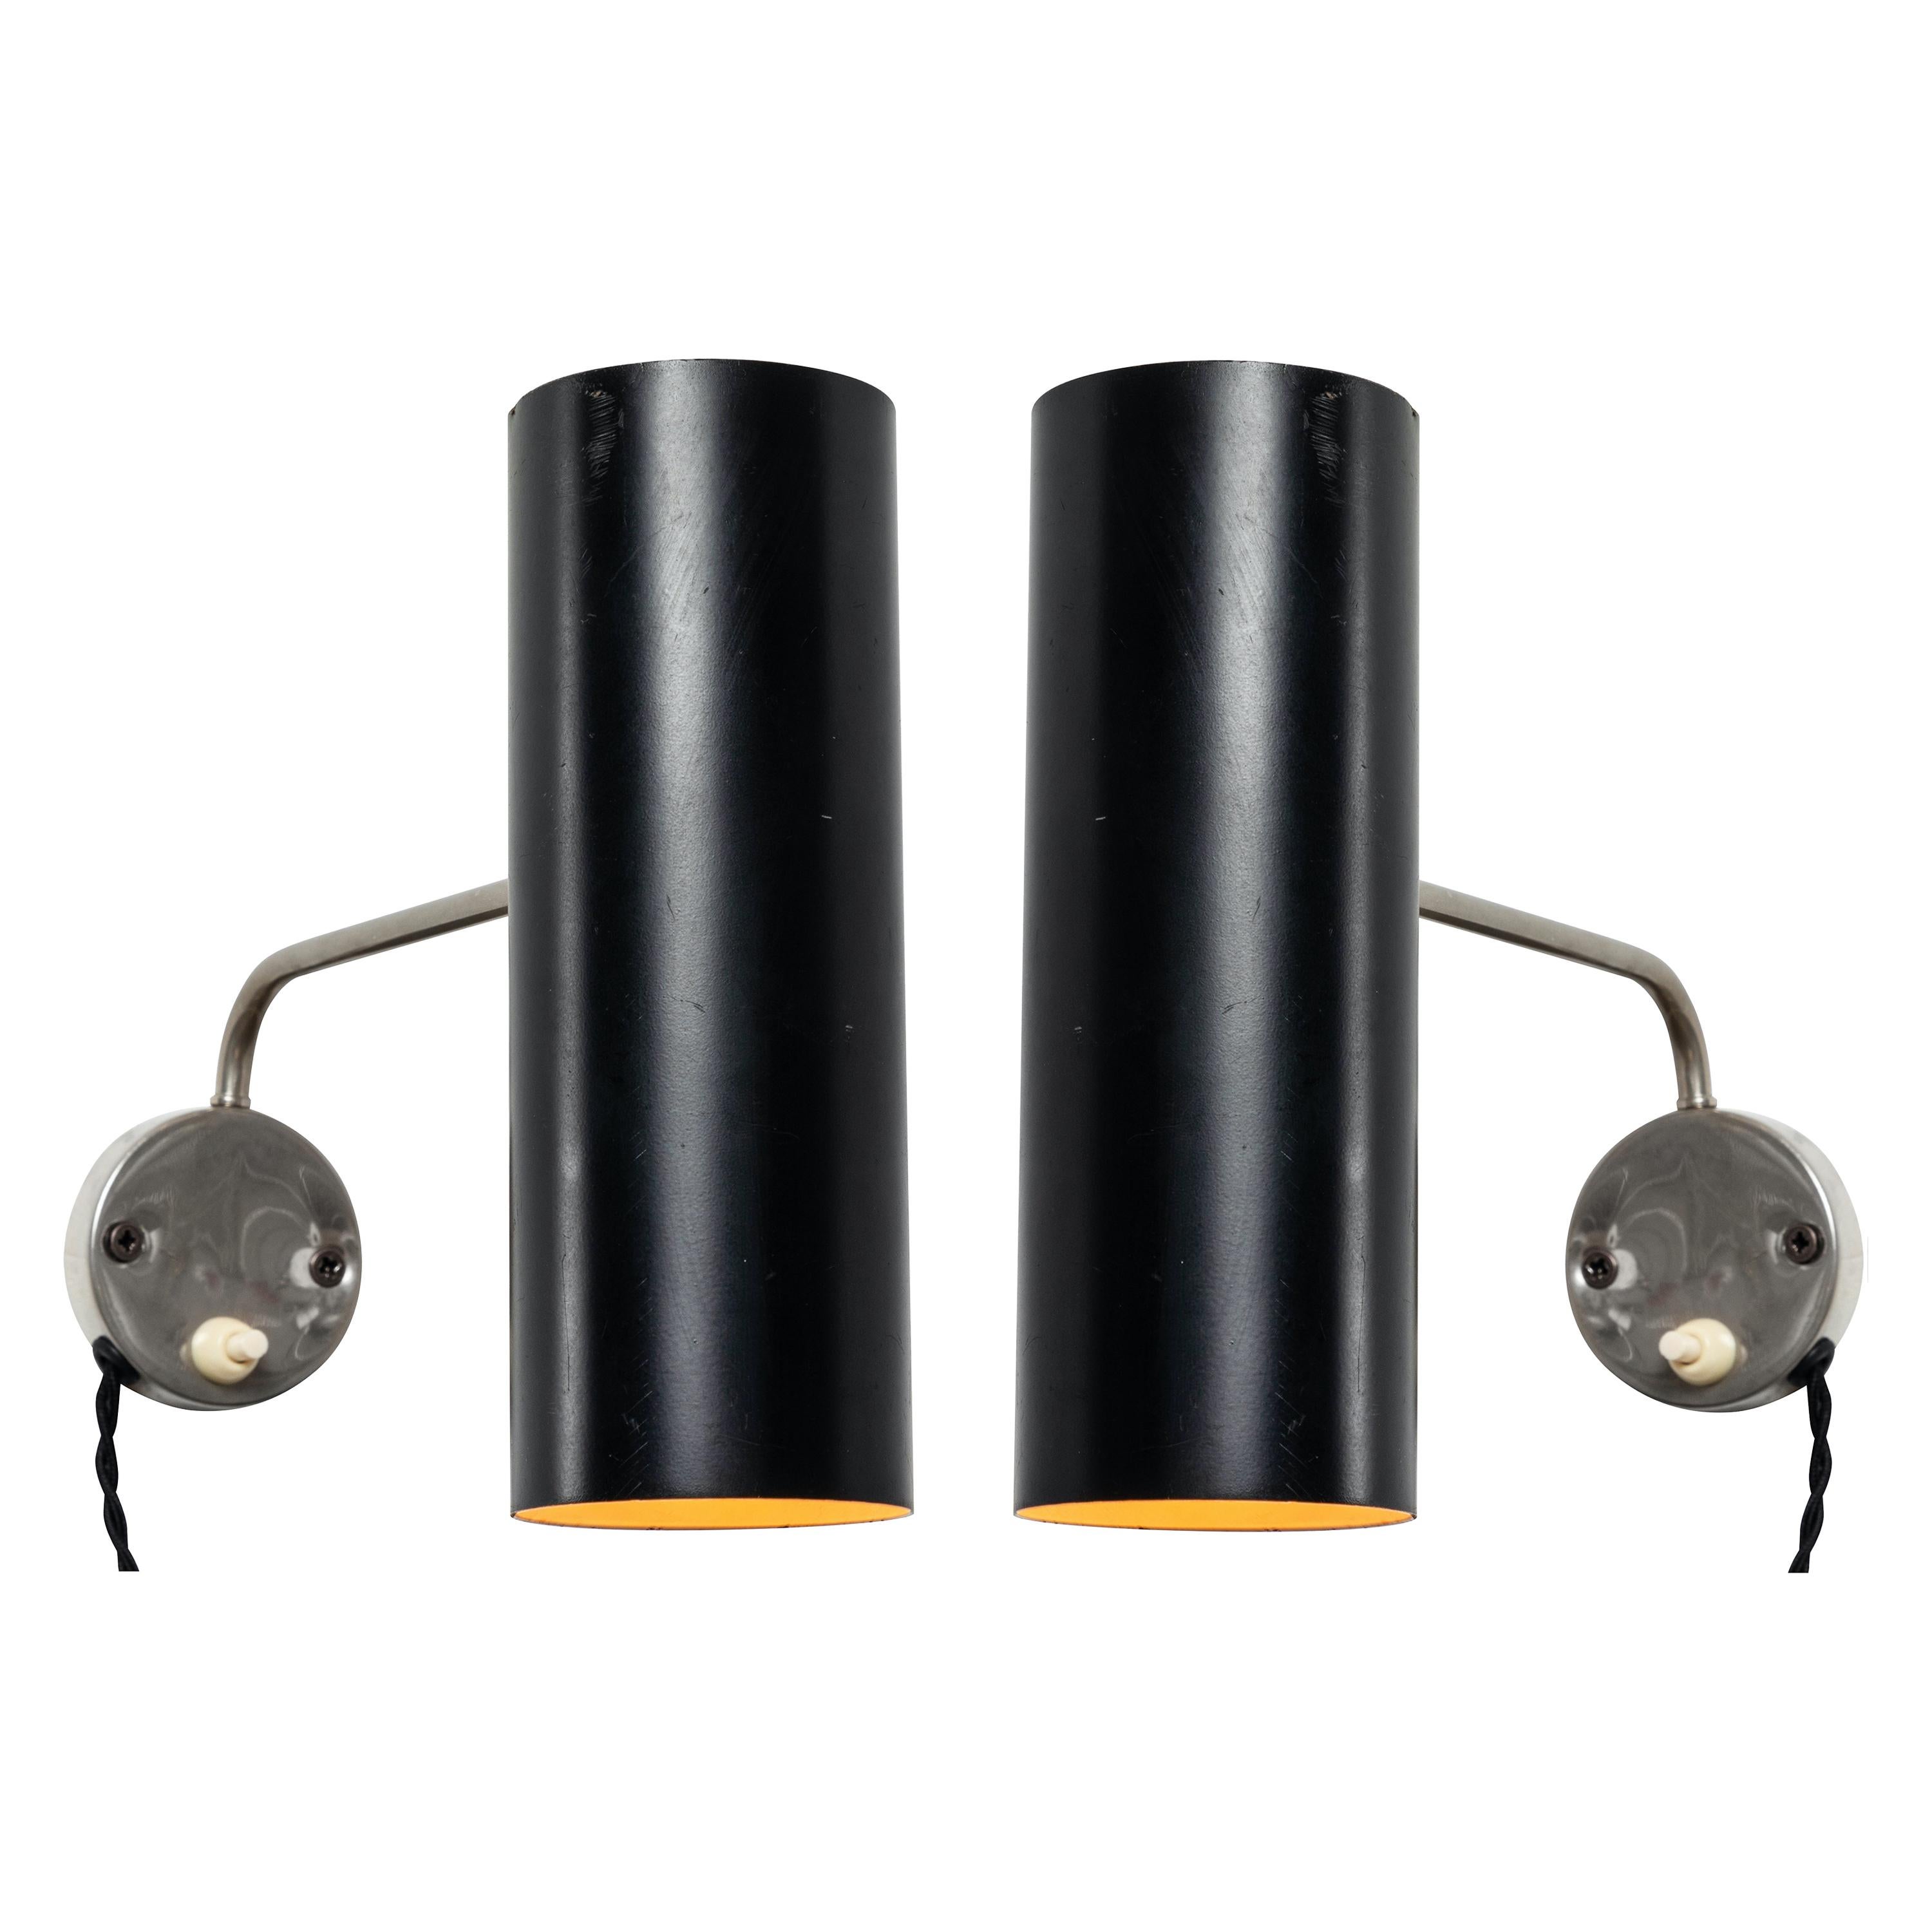 Pair of 1960s Tito Agnoli wall lights for O-Luce. An extremely rare matched pair executed in black painted aluminum and nickeled metal. One of his most highly refined Minimalist designs. A highly adjustable wall light, the arms can be rotated